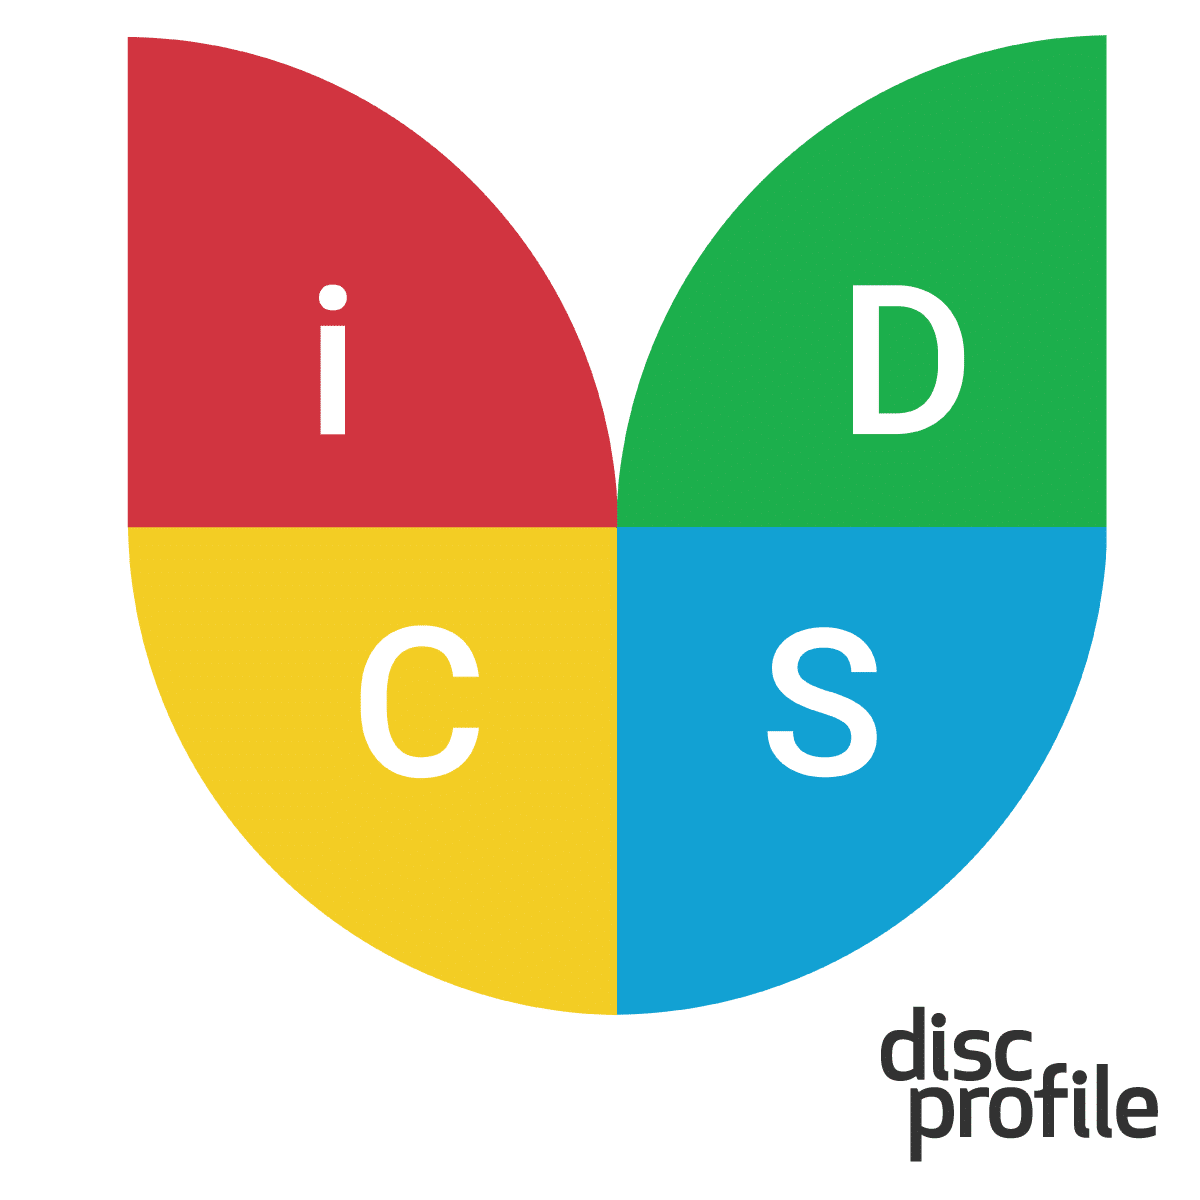 DiSC circumplex edited to be in the shape of a tulip or heart